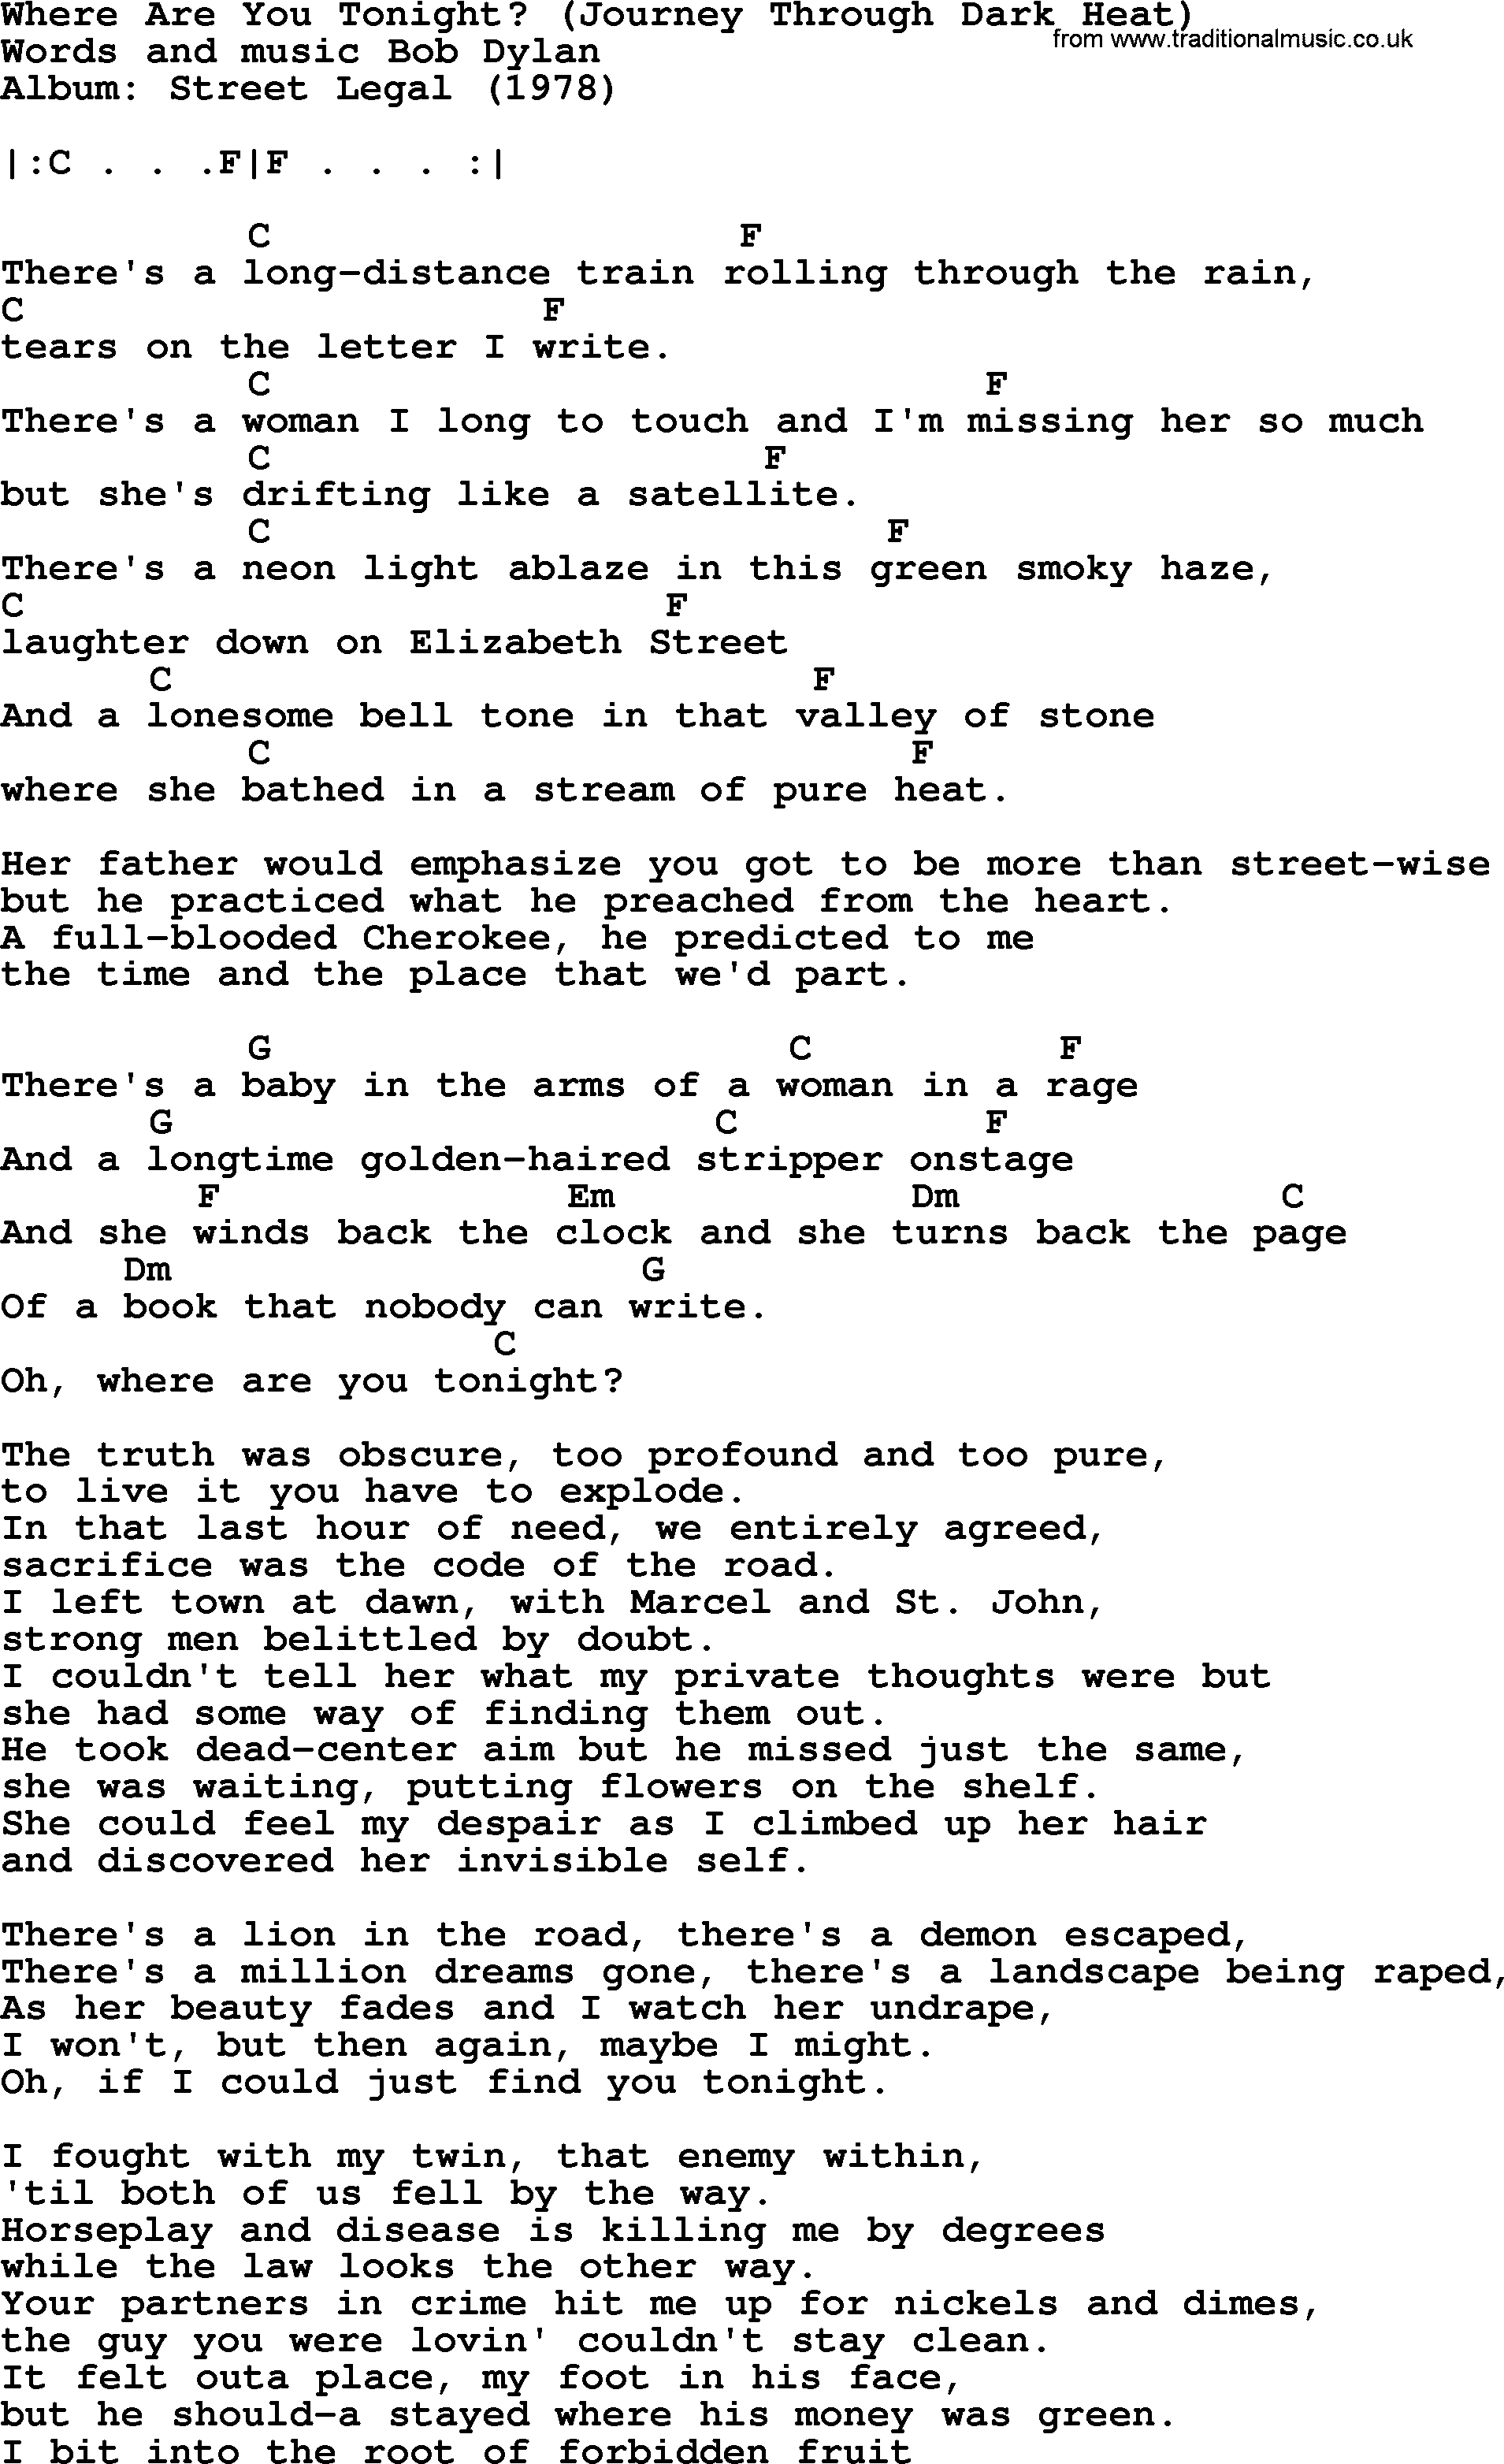 Bob Dylan song, lyrics with chords - Where Are You Tonight (Journey Through Dark Heat)